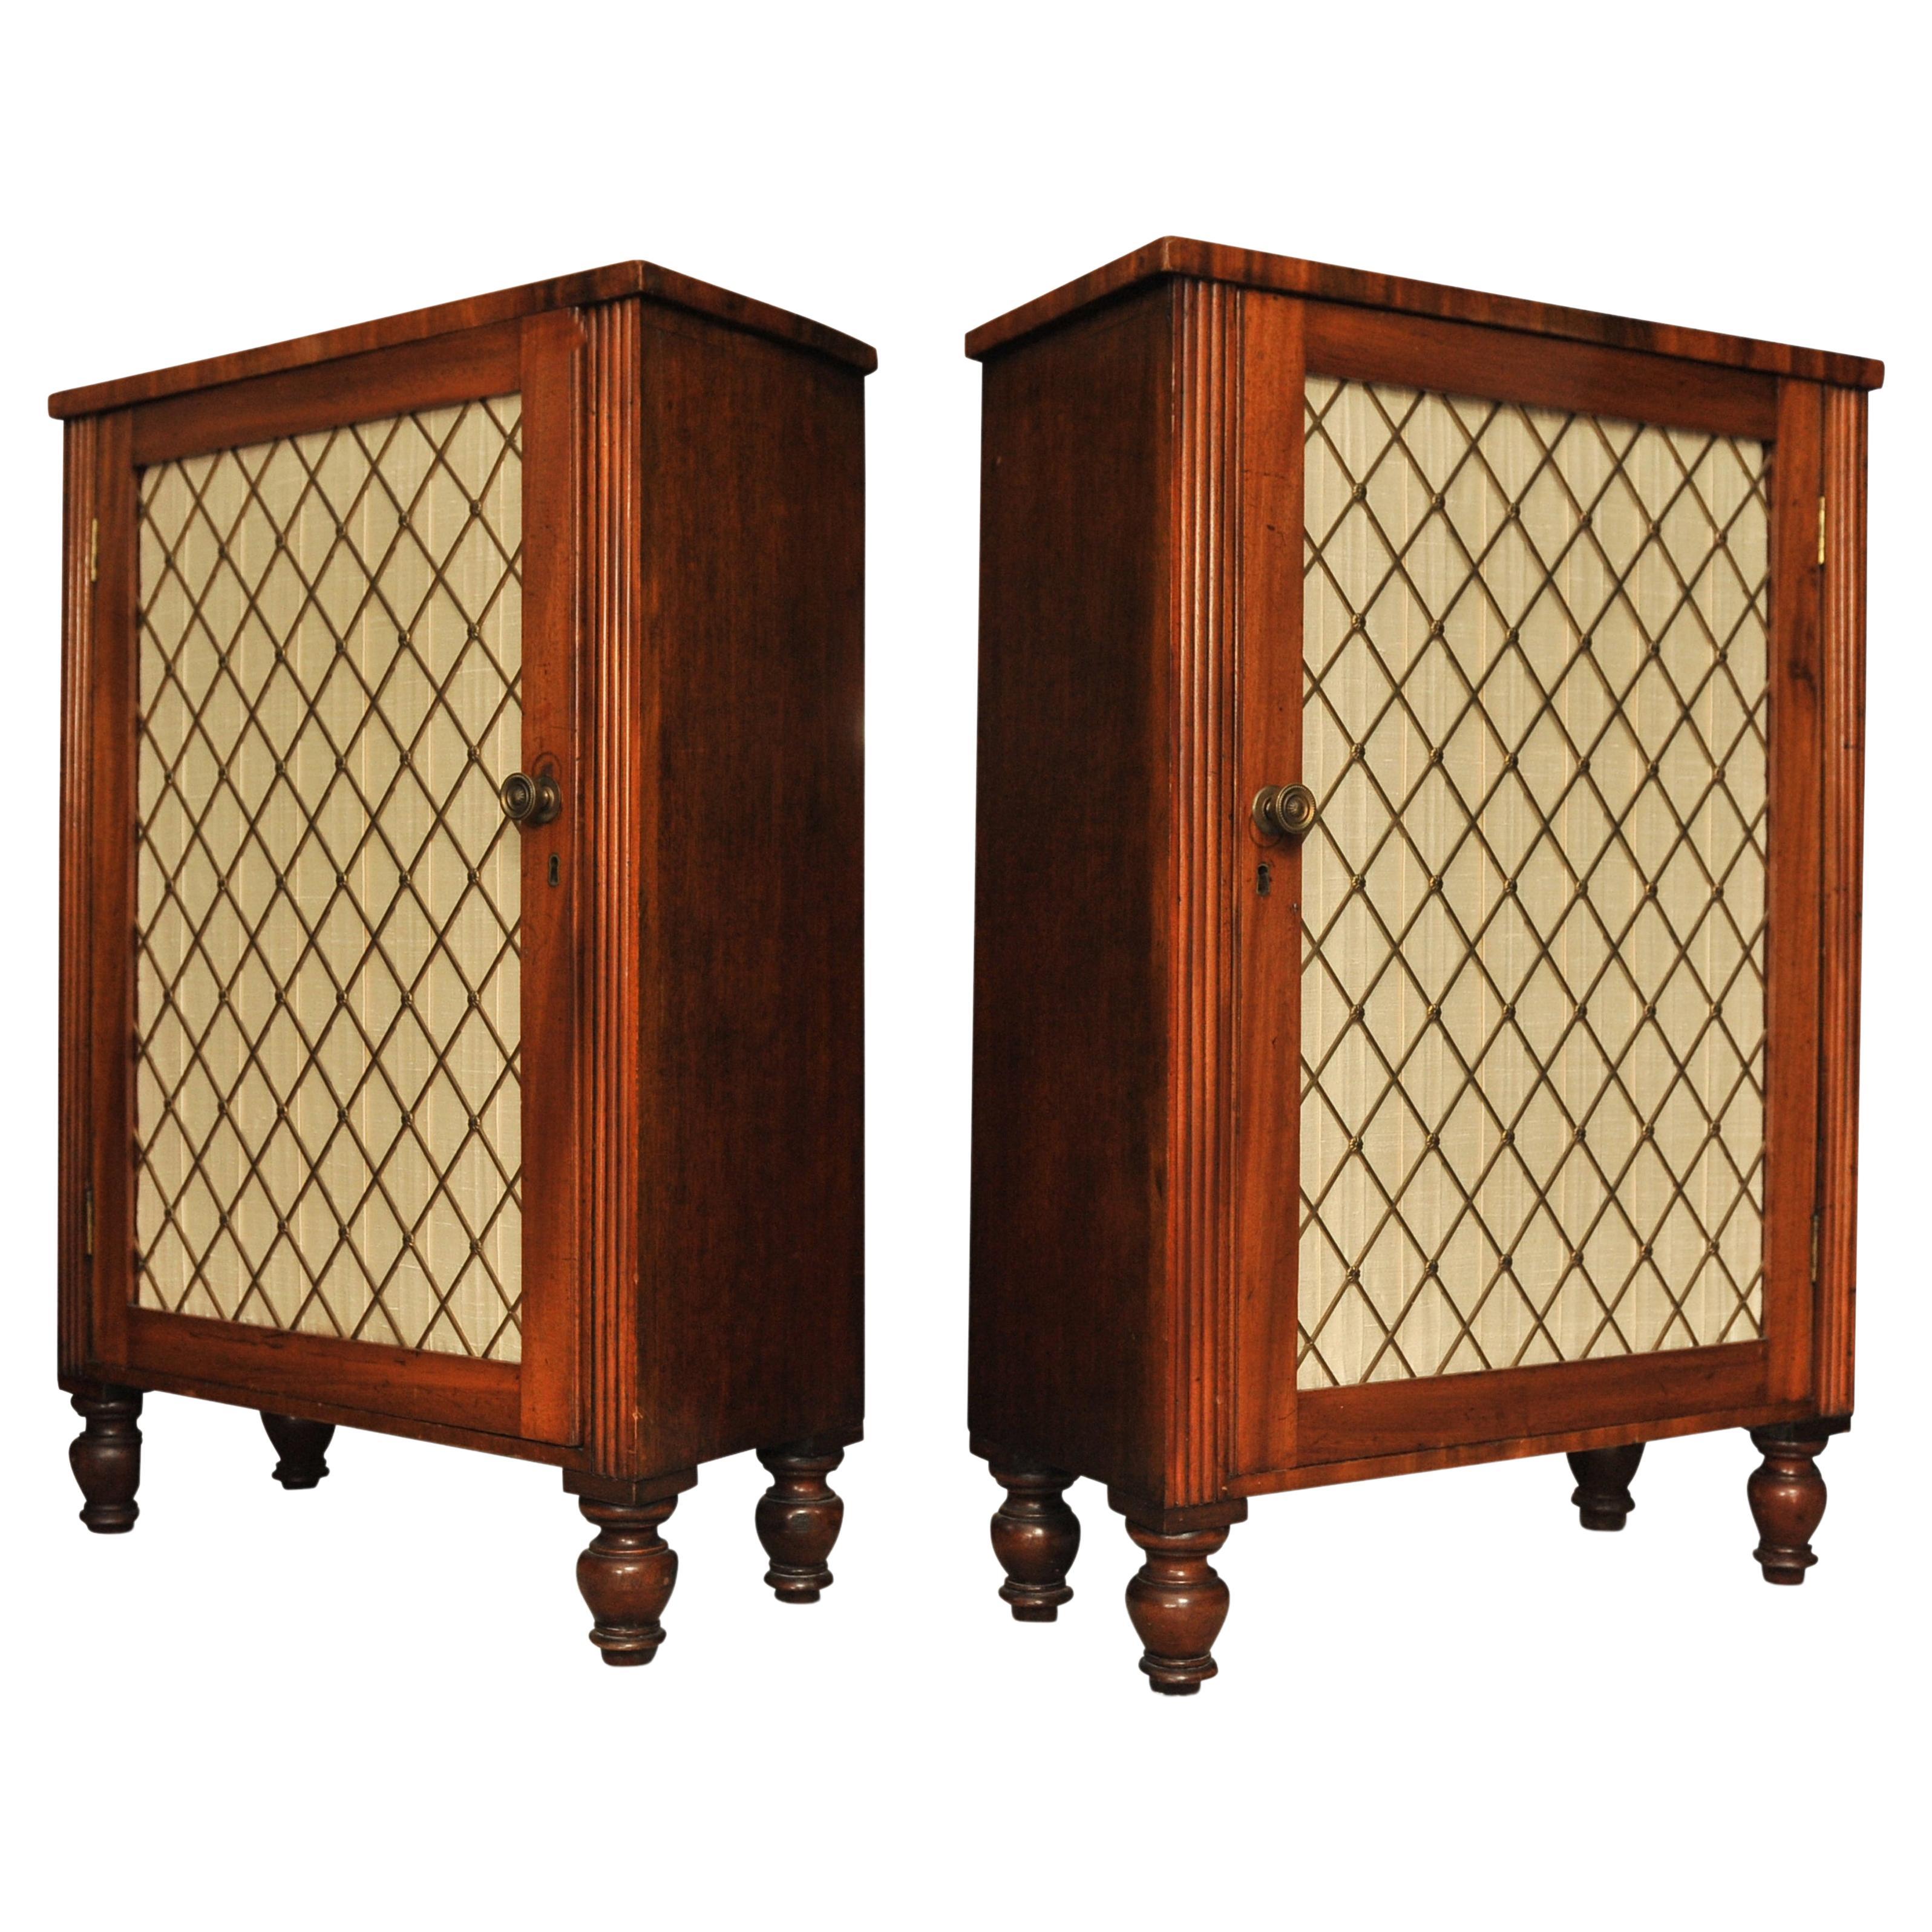 Rare Pair of Regency Period Mahogany Side Cabinets with Brass Lattice Fronts